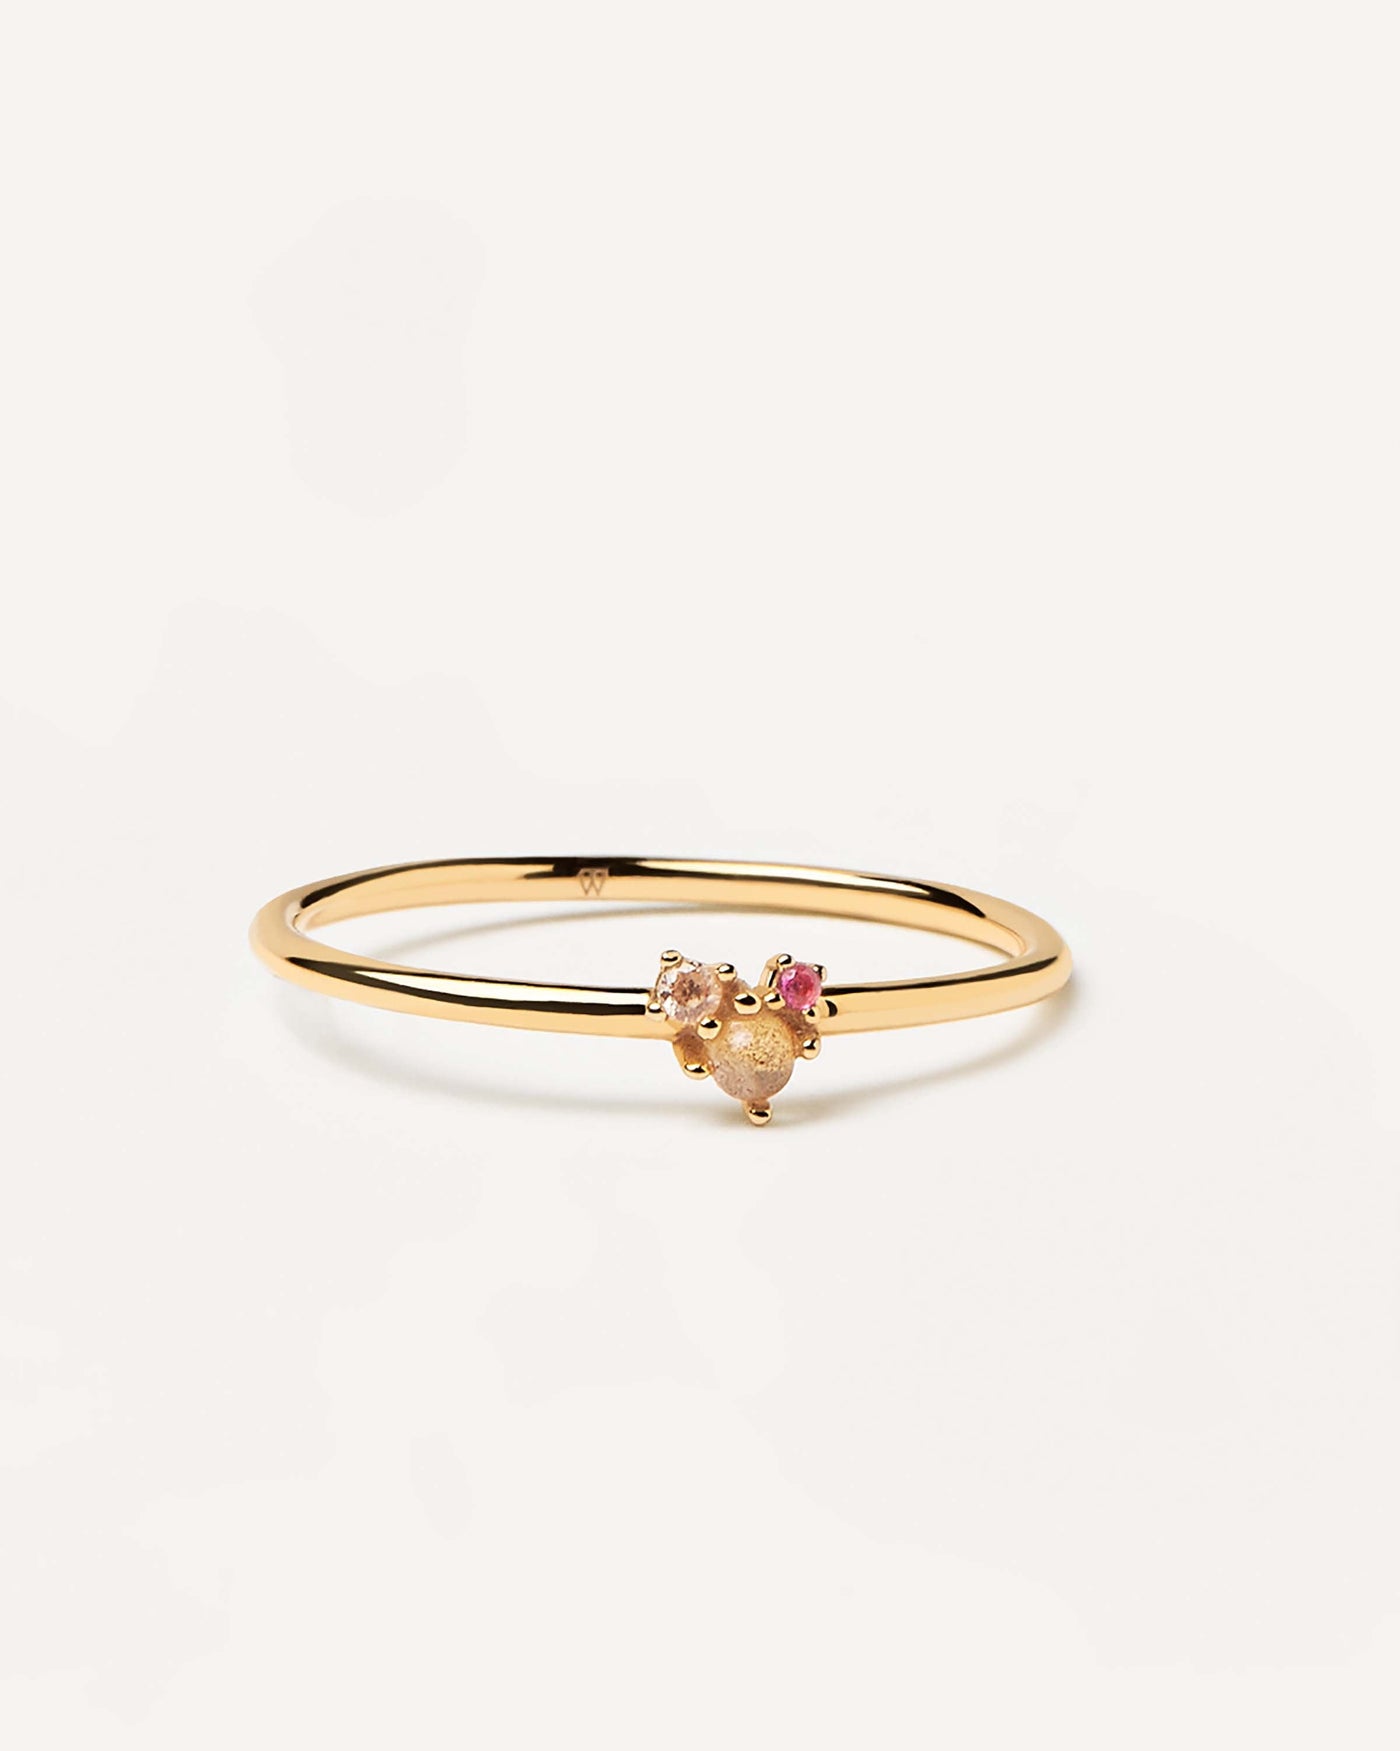 2023 Selection | Rosé Blush Ring. Labradorite, light champage, rose red zirconias set on thin gold plated silver ring. Get the latest arrival from PDPAOLA. Place your order safely and get this Best Seller. Free Shipping.